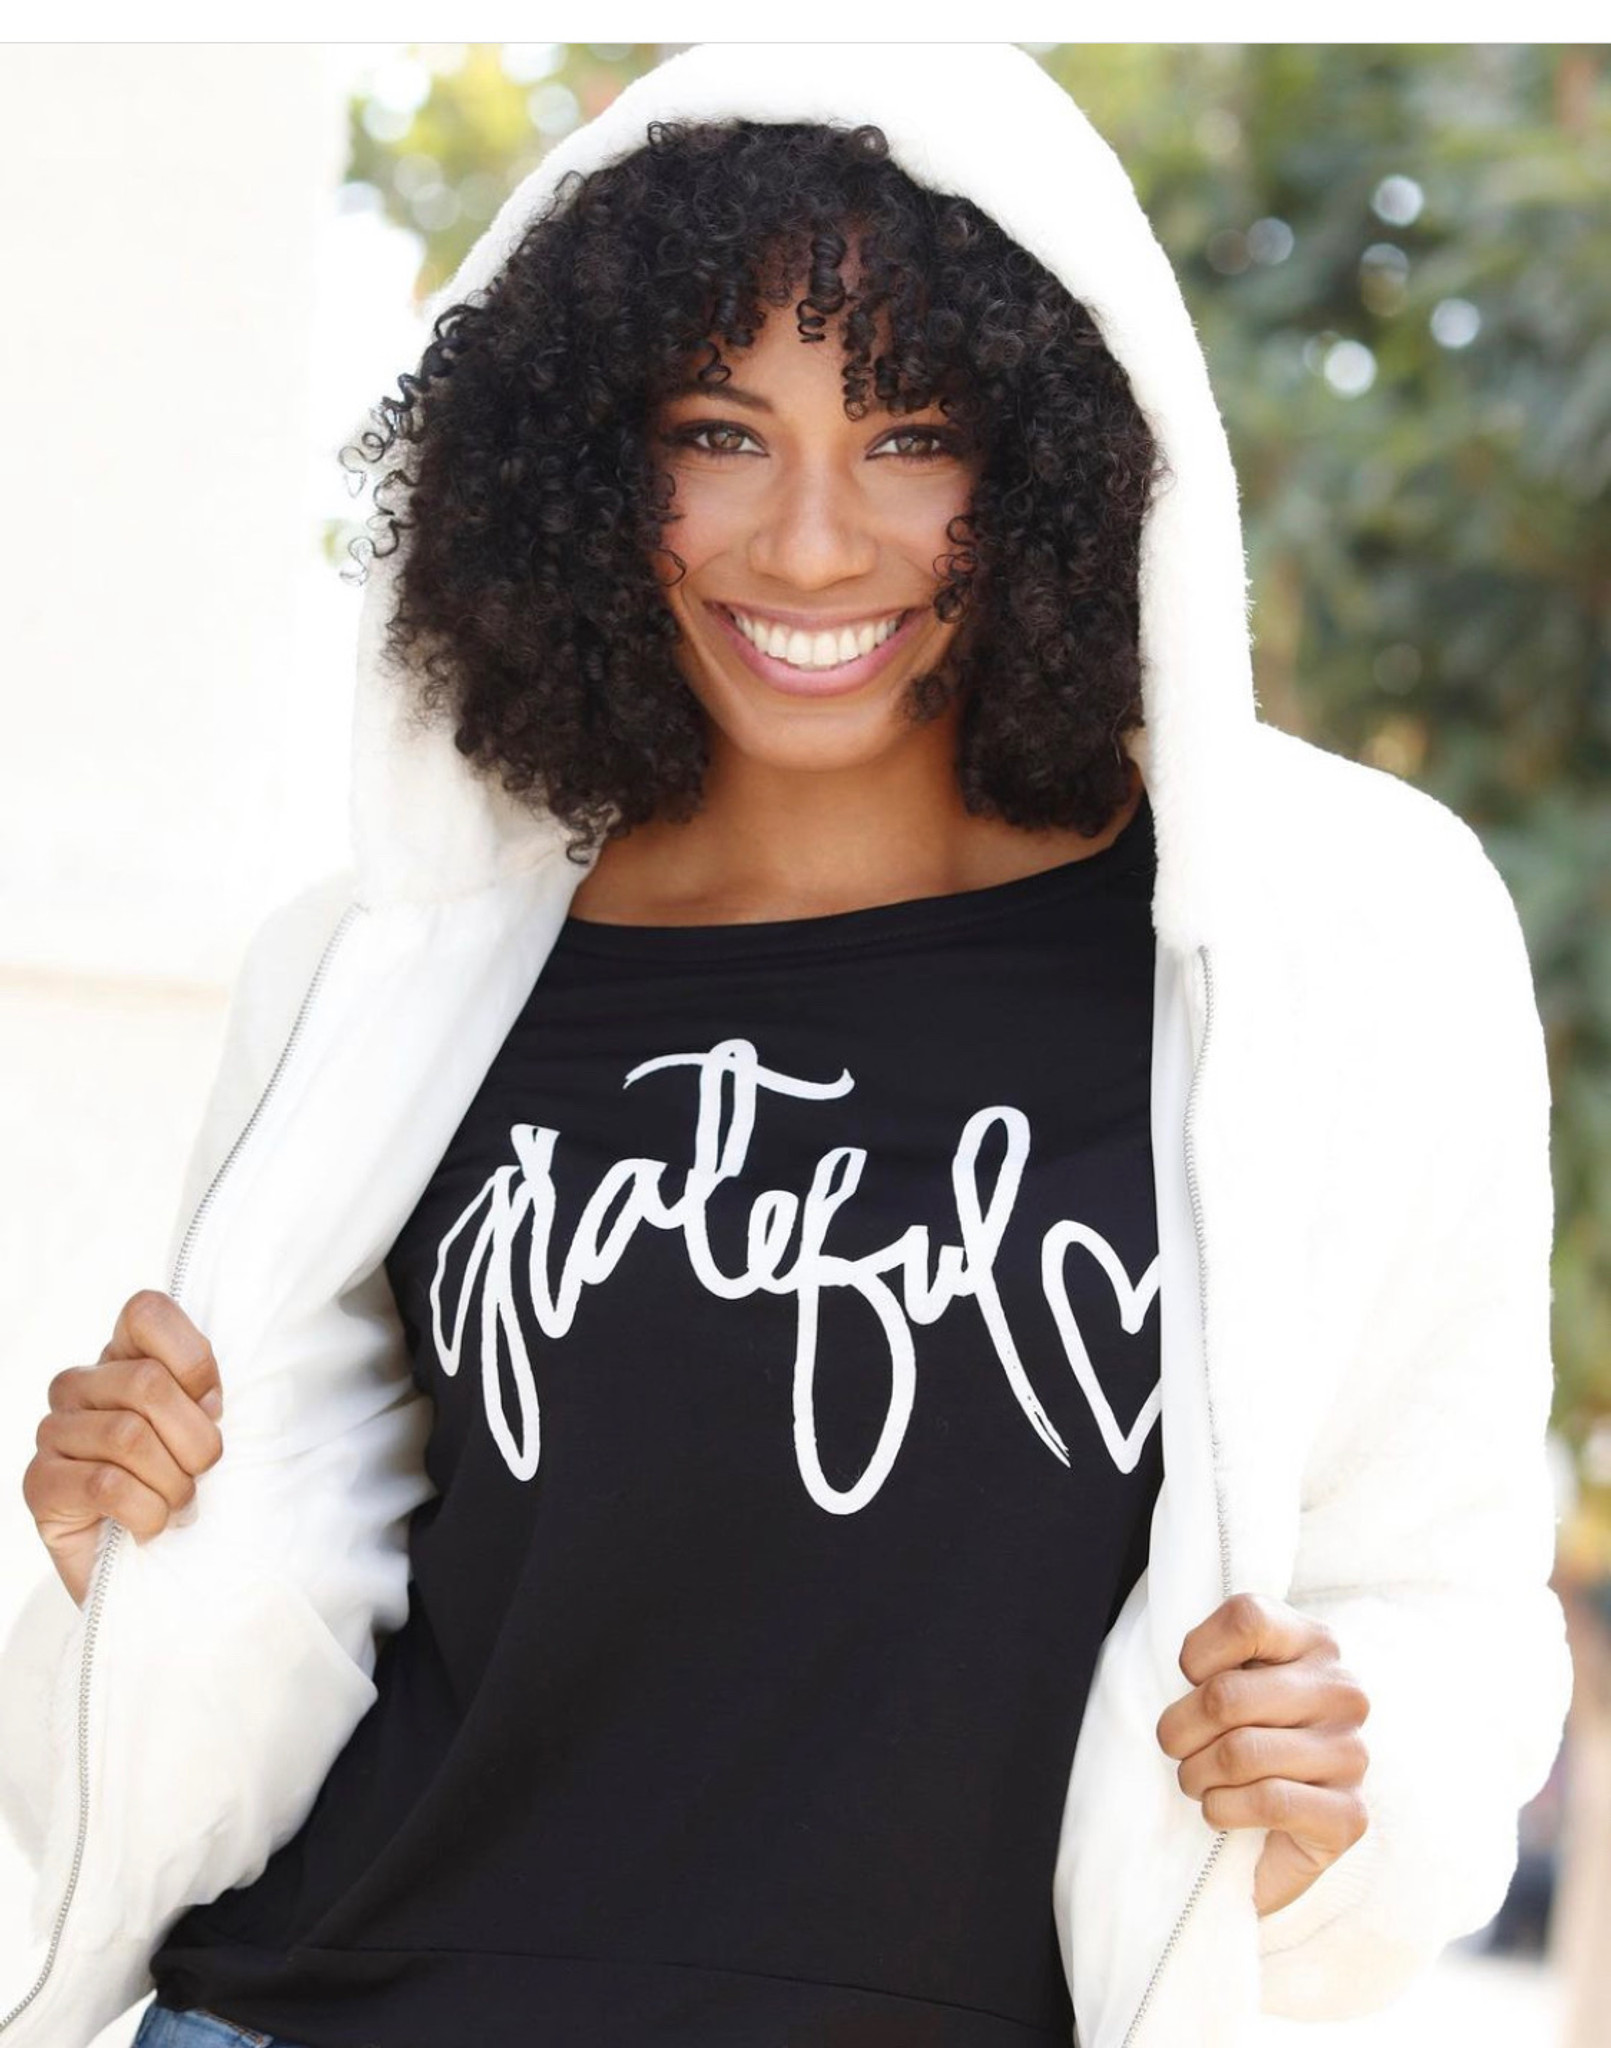 GRATEFUL HEART L/S TEE with HEARTS on Arm. (Black) 